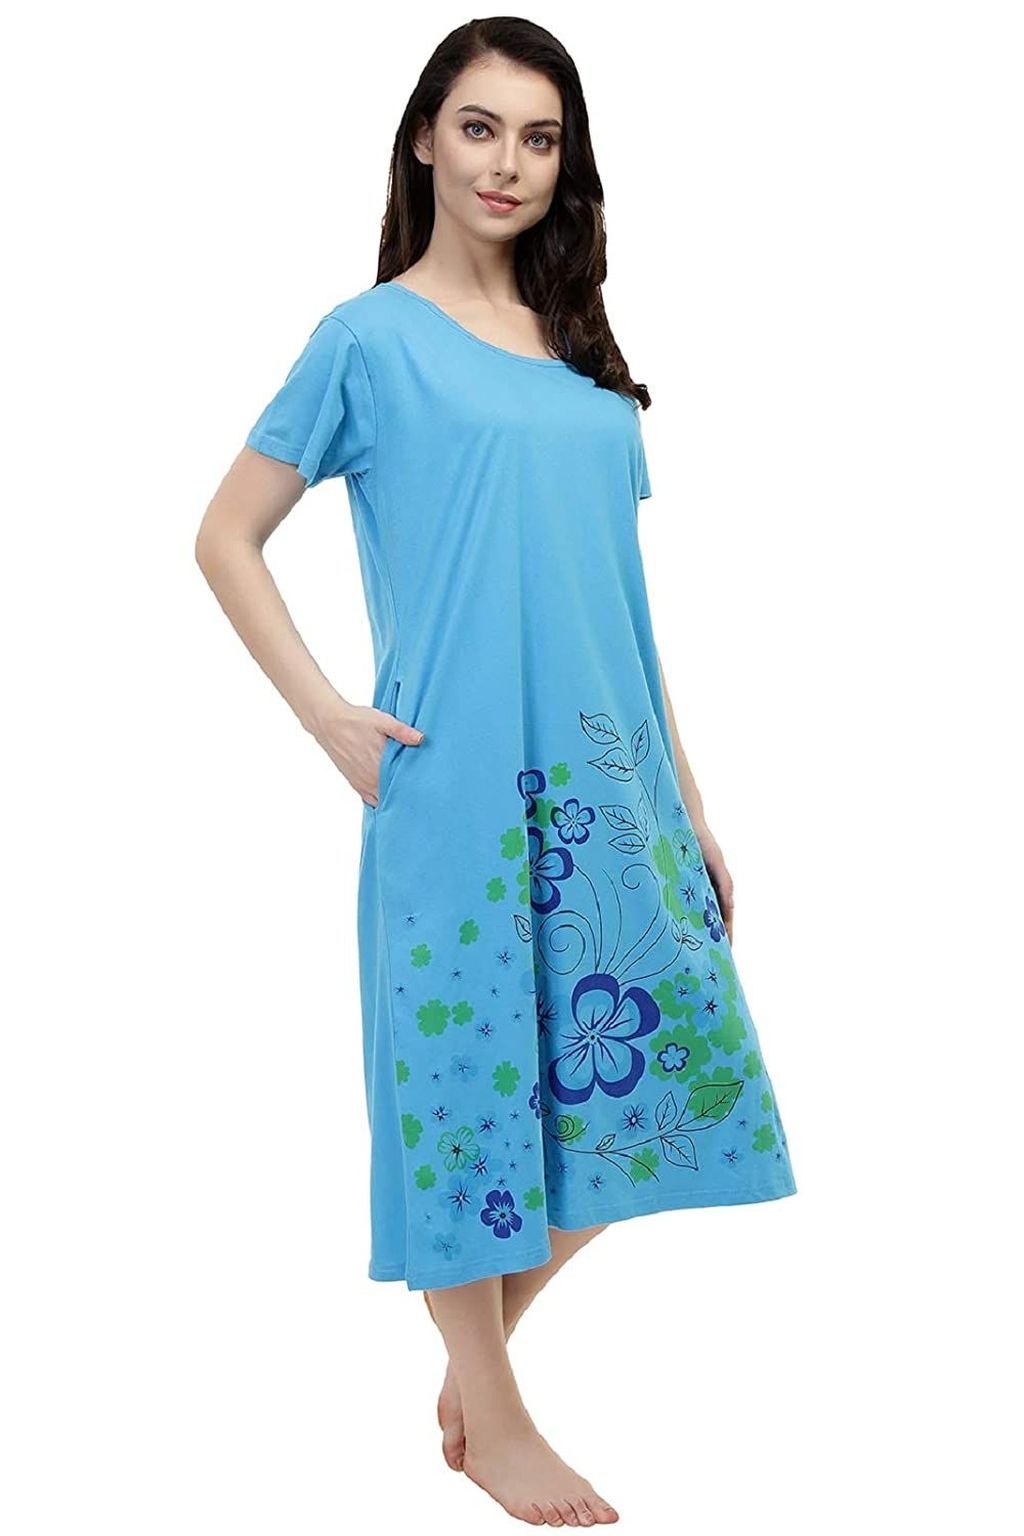 Buy Women's Satin Short Night Dress Online In India At Discounted Prices